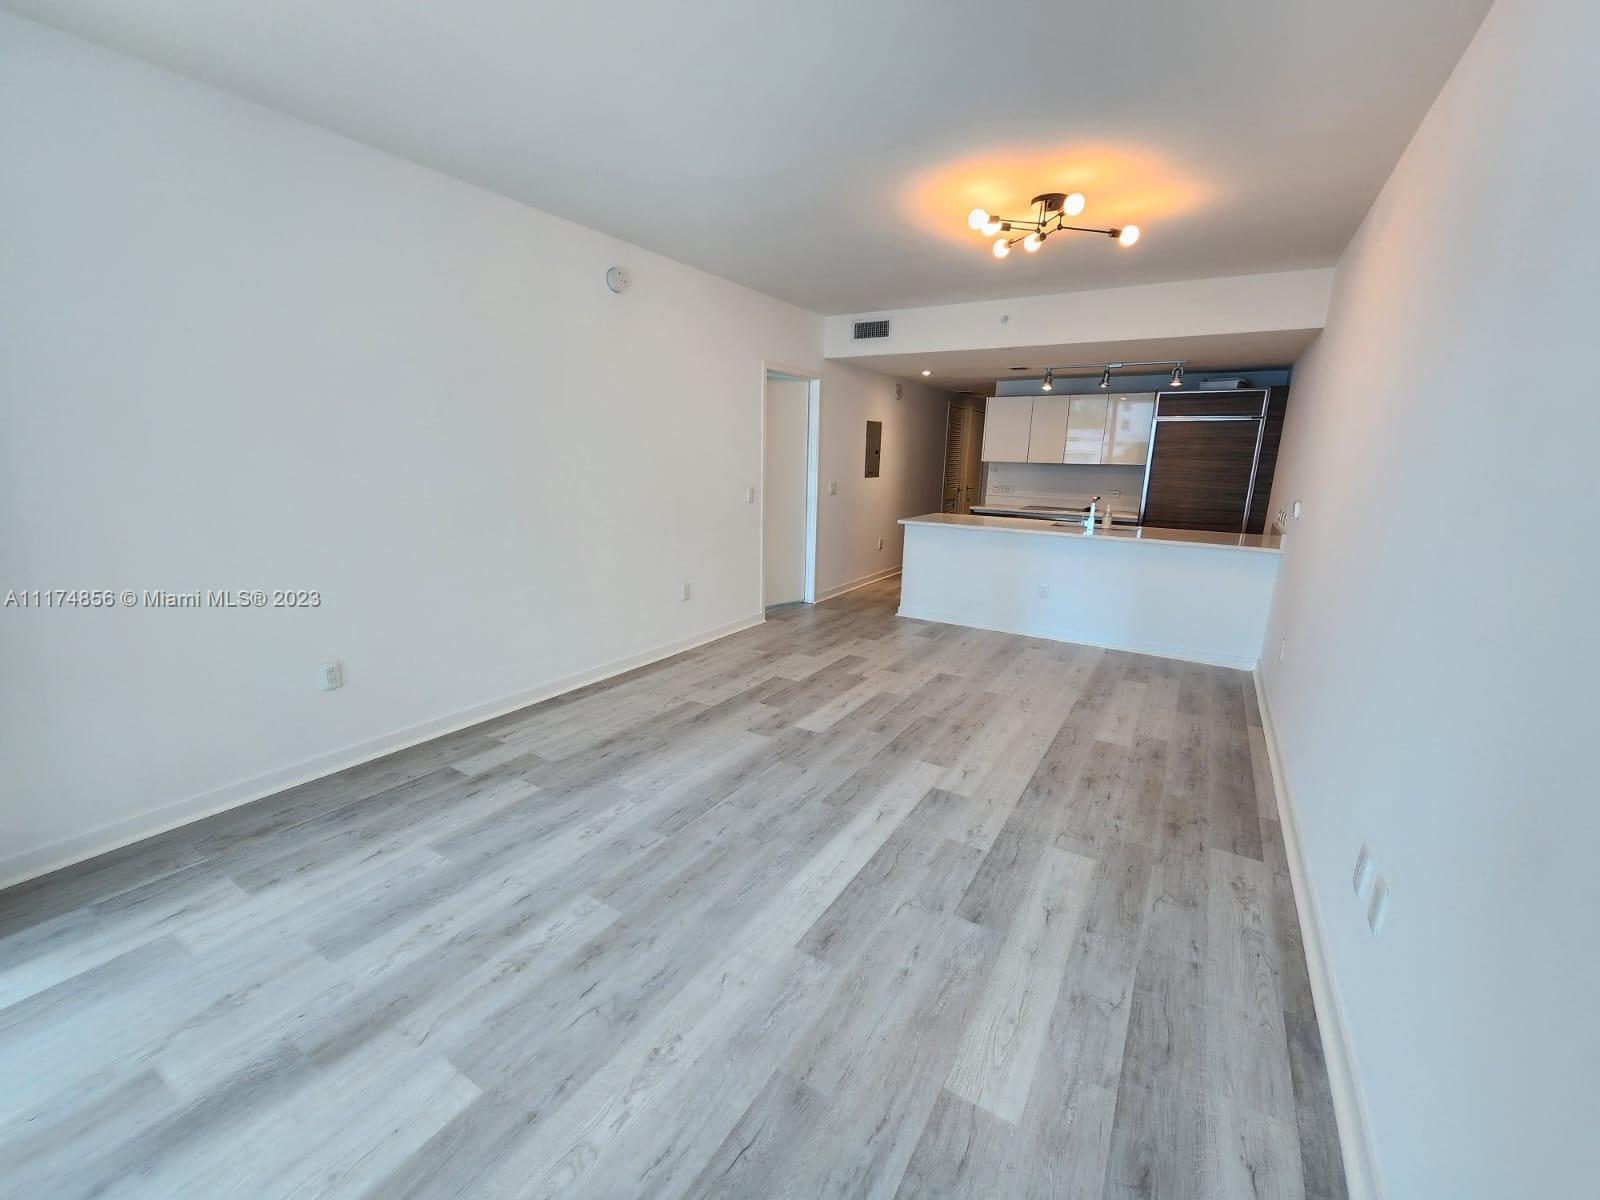 SPECTACULAR 2 BED 2 BATH RESIDENCE AT MILLECENTO. FEATURING TOP OF THE LINE APPLIANCES, BUILT IN CLOSETS, GREAT VIEWS AND MORE! BUILDING WITH 5 STAR AMENITIES SUCH AS FITNESS CENTER, POOL, SPA AND MORE. BRAND NEW FLOORING.